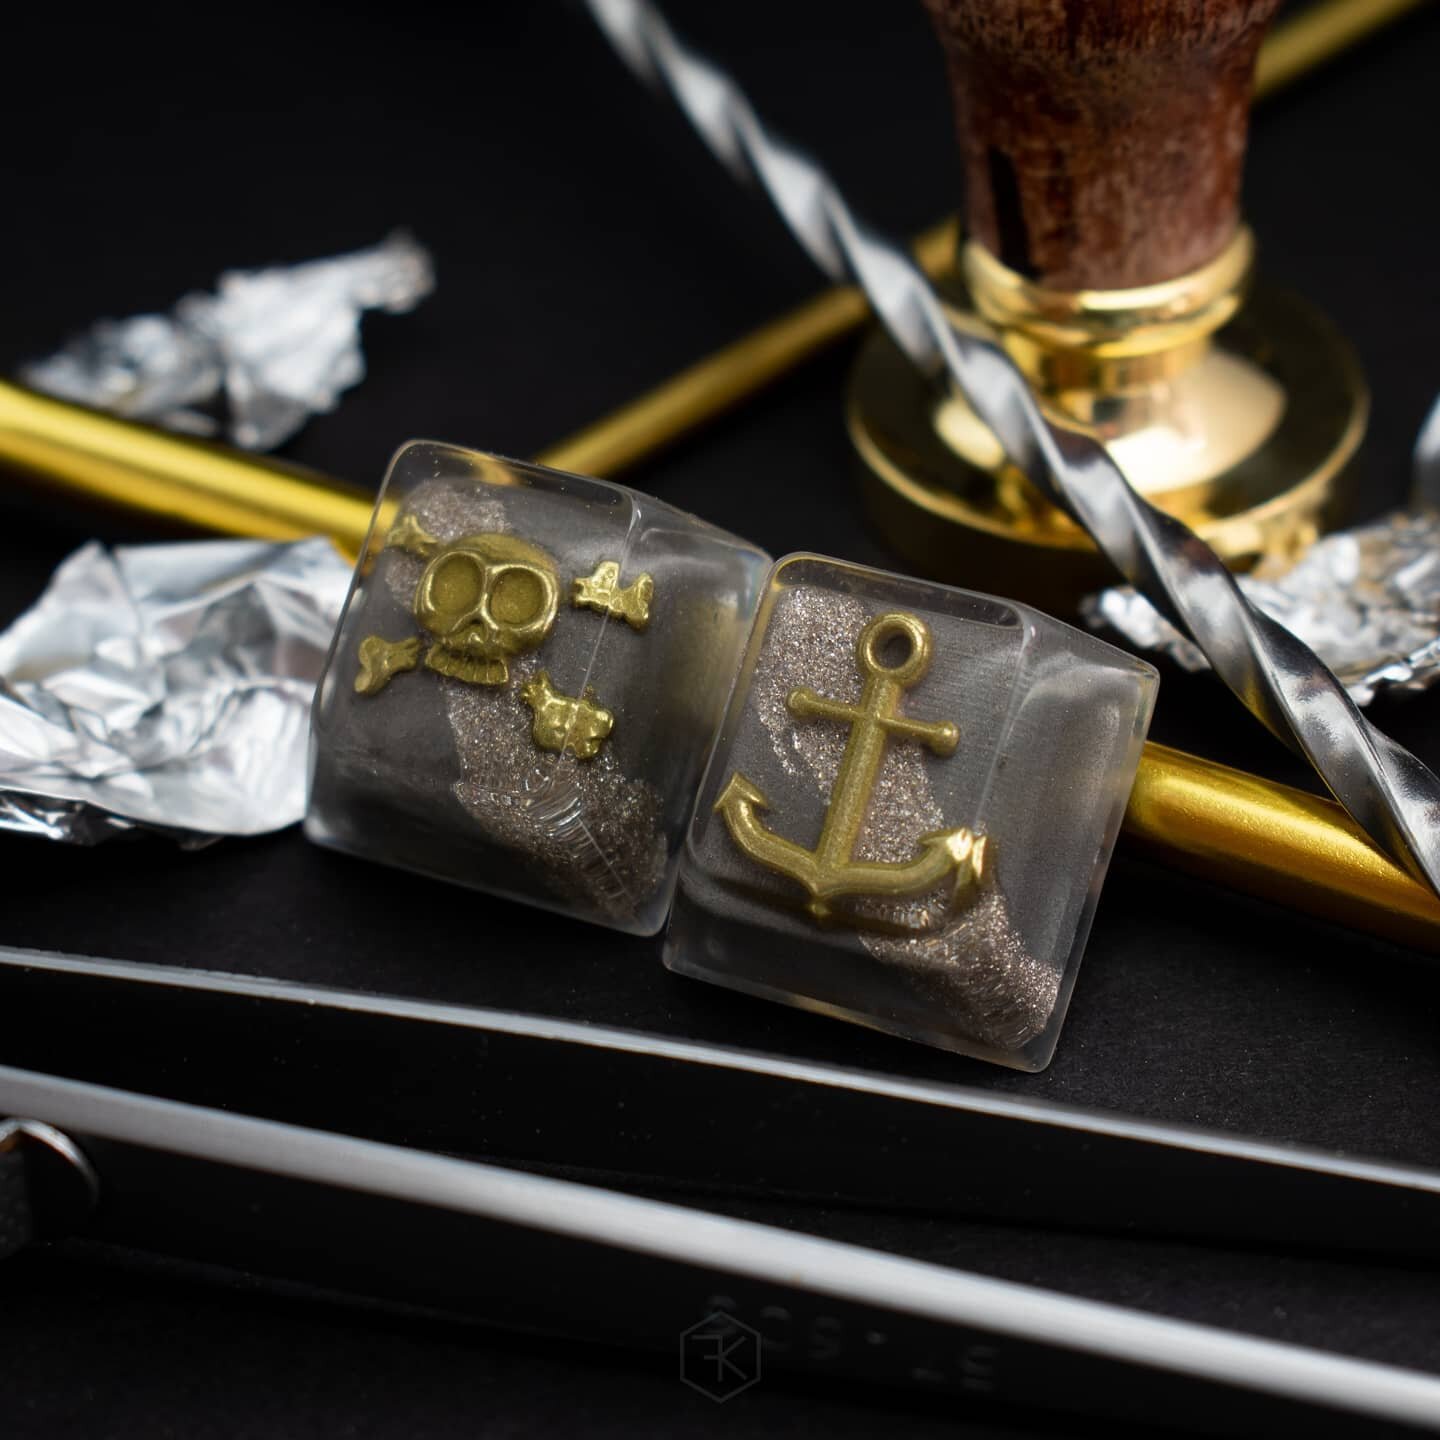 𝘔𝘦𝘵𝘢𝘭 𝘔𝘢𝘳𝘷𝘦𝘭 - Now open! ⁣
⁣
For your purchasing pleasure; keycaps that are cold-cast with 6 (yes, you read that right, 6) different REAL metal powders!⁣
Each inner &ldquo;core&rdquo; was also meticulously hand-sanded using a 3-step progre